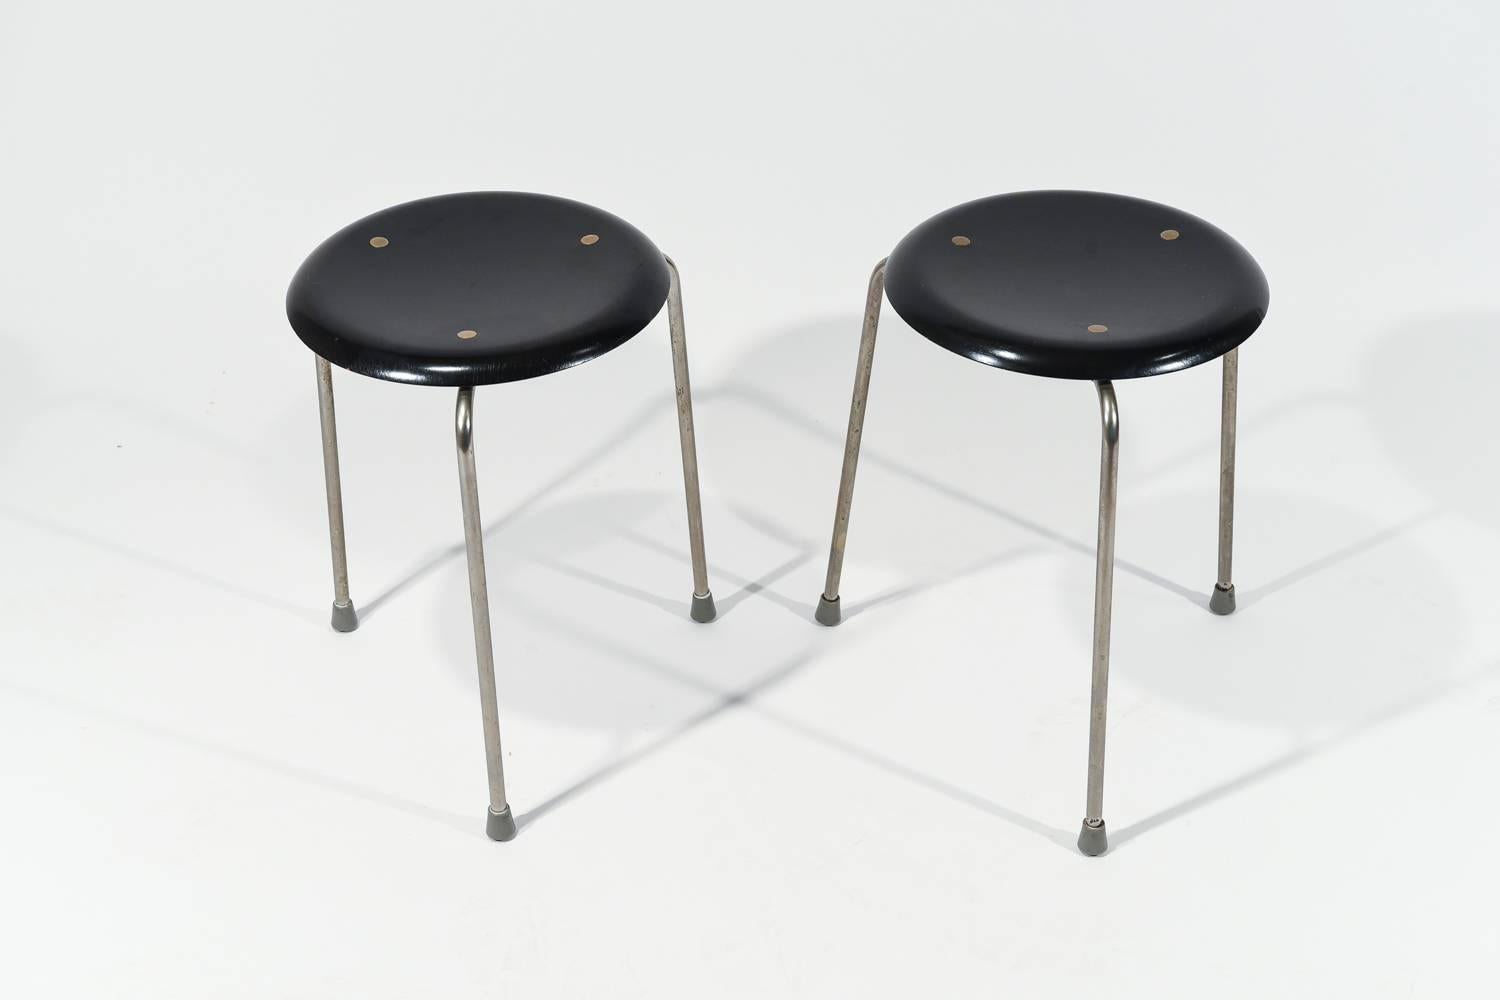 The Danish Mid-Century Dot stool, model 3107, was designed by Arne Jacobsen in the 1950s and manufactured by Fritz Hansen in the 1960s. It features a three-legged design, later developing into a four-legged design. It captures a simple yet pleasing